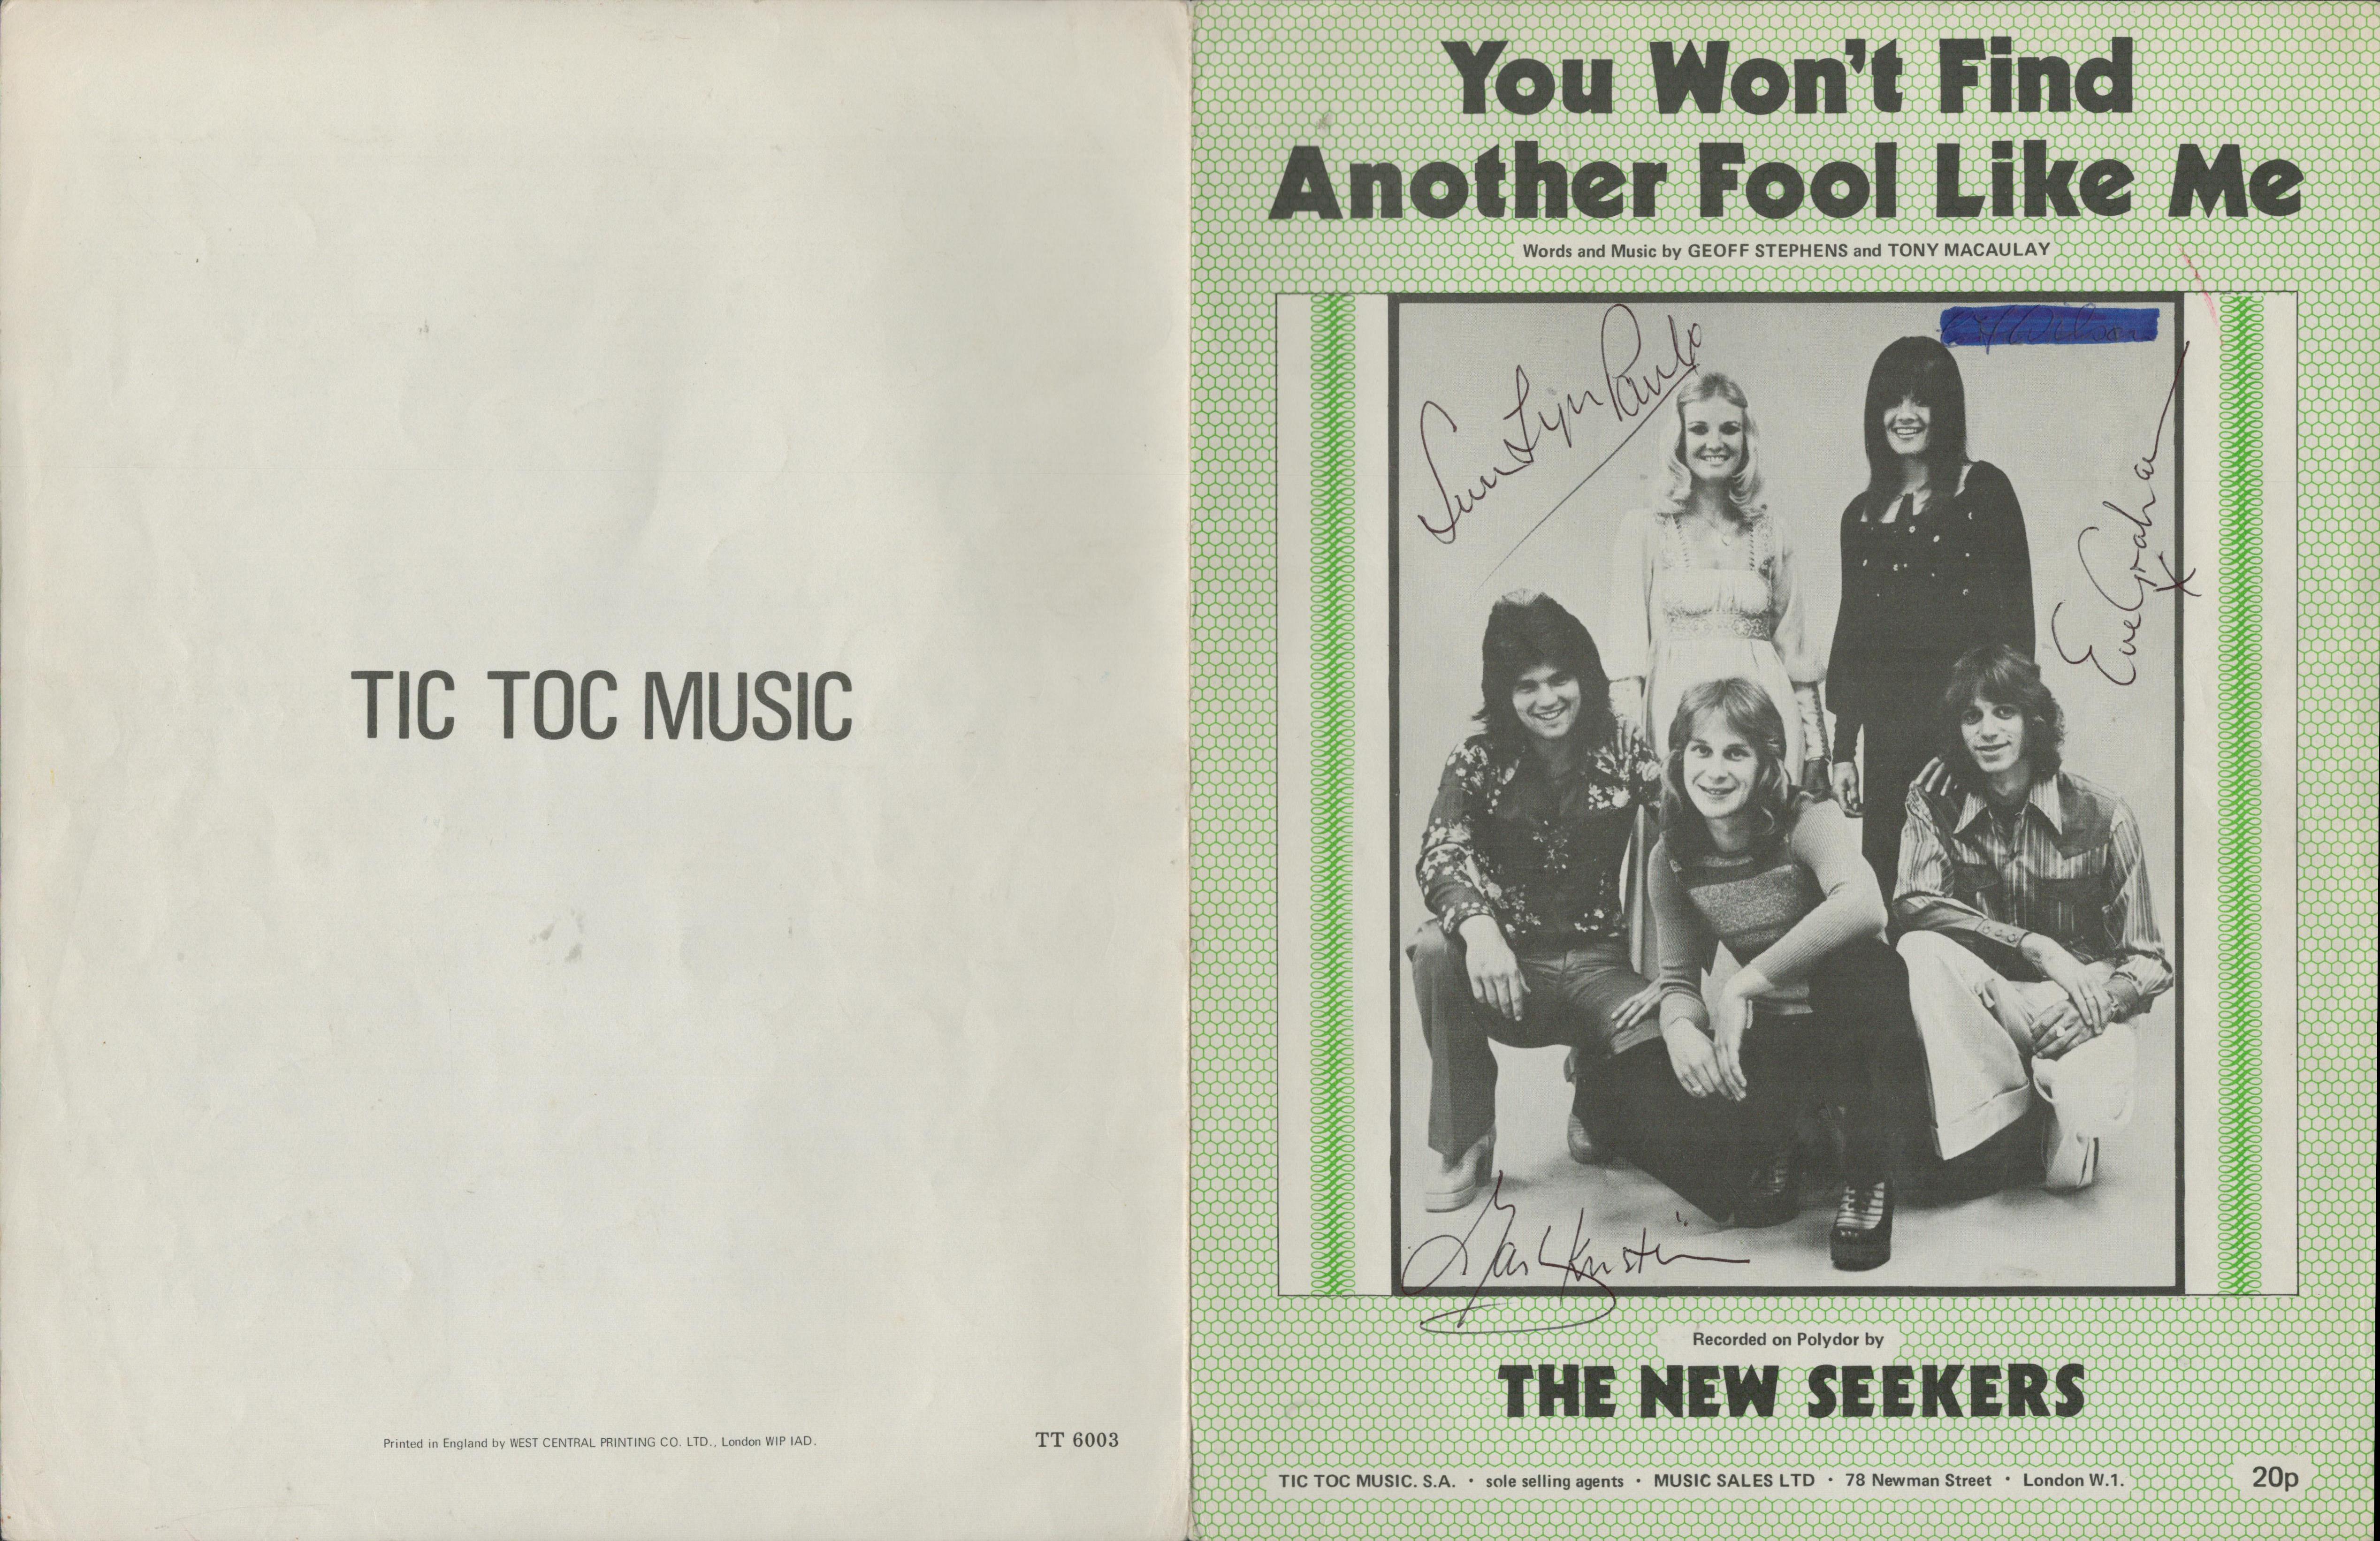 The New Seekers British Pop Group Vintage Sheet Music 'You Won't Find Another Fool Like Me' Signed